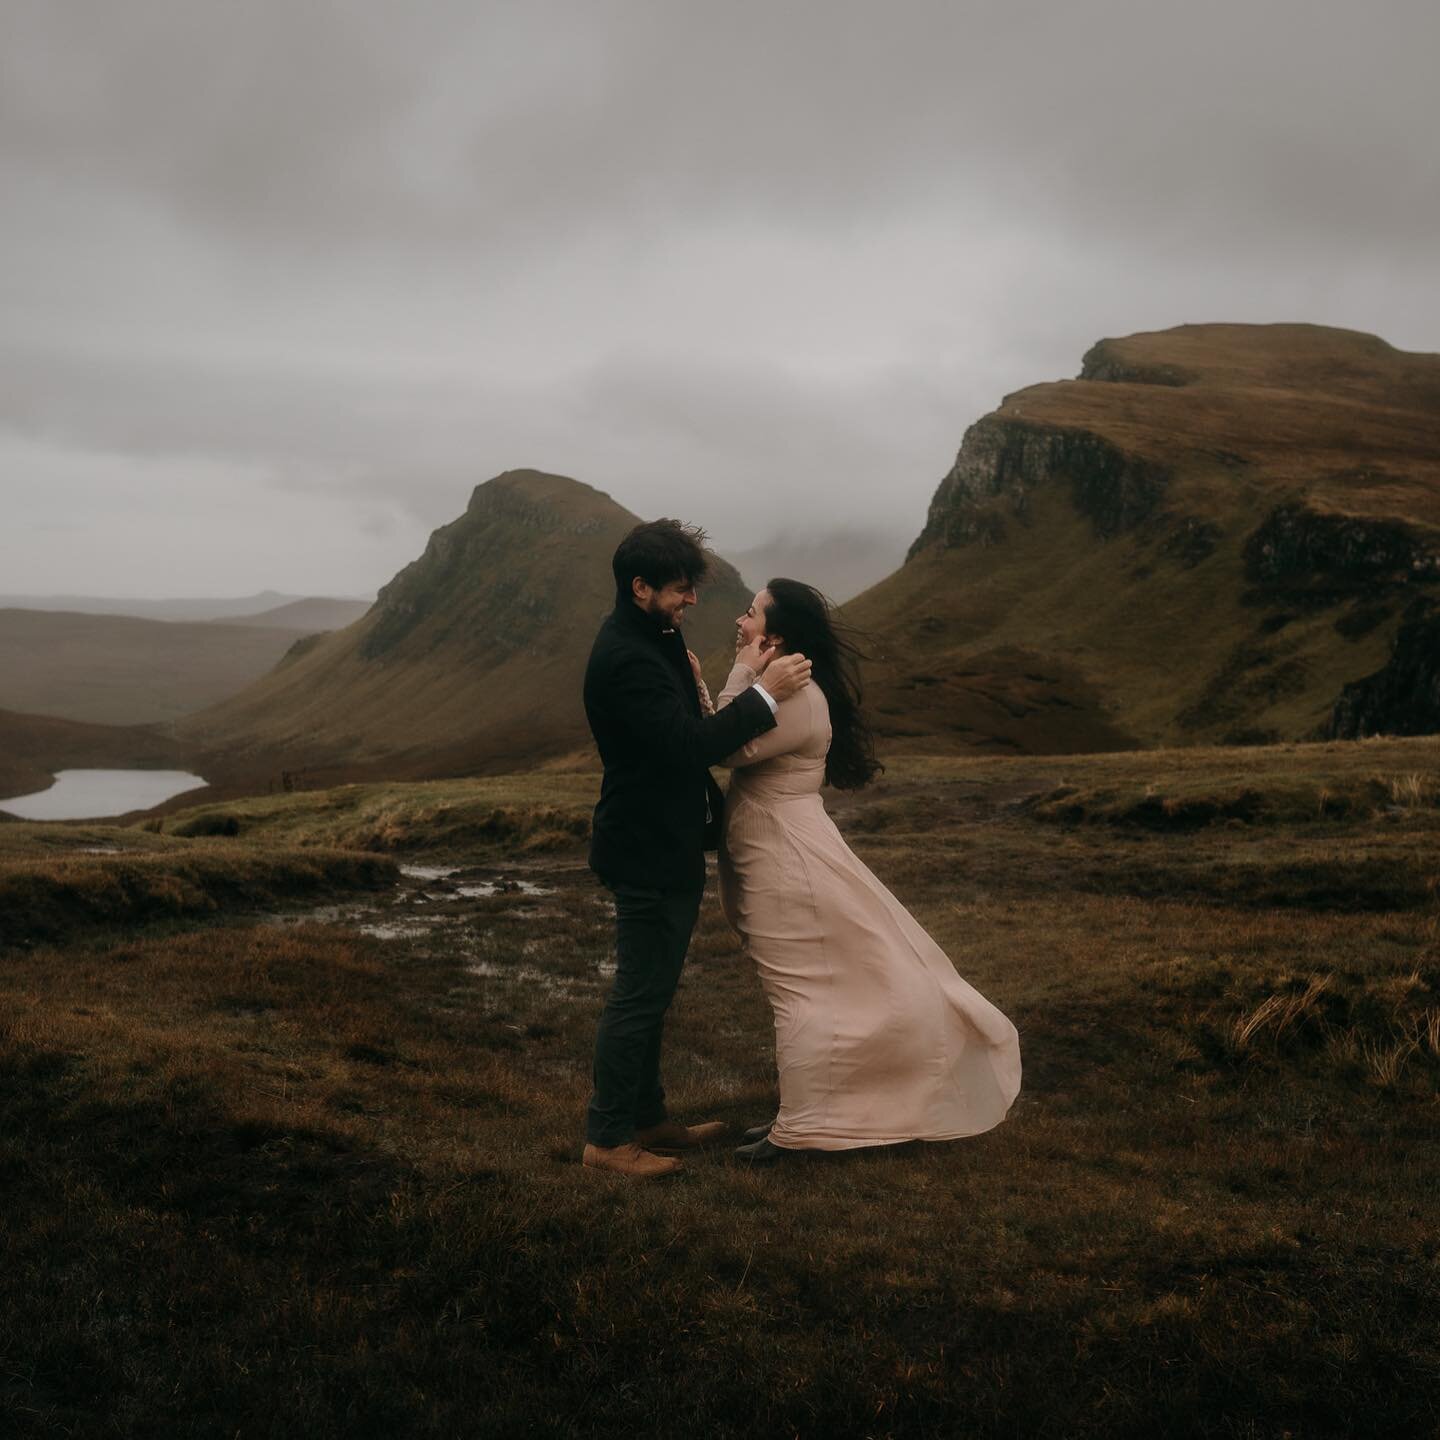 Wild, autumnal adventures on Skye ✨🍂 

It was a joy to capture Tiffany &amp; Evan, who fully embraced the wild weather, laughing &amp; dancing 🤍 

#scotlandelopementphotographer #scottishelopement #elopmentphotographer #elopementlove #wildelopement